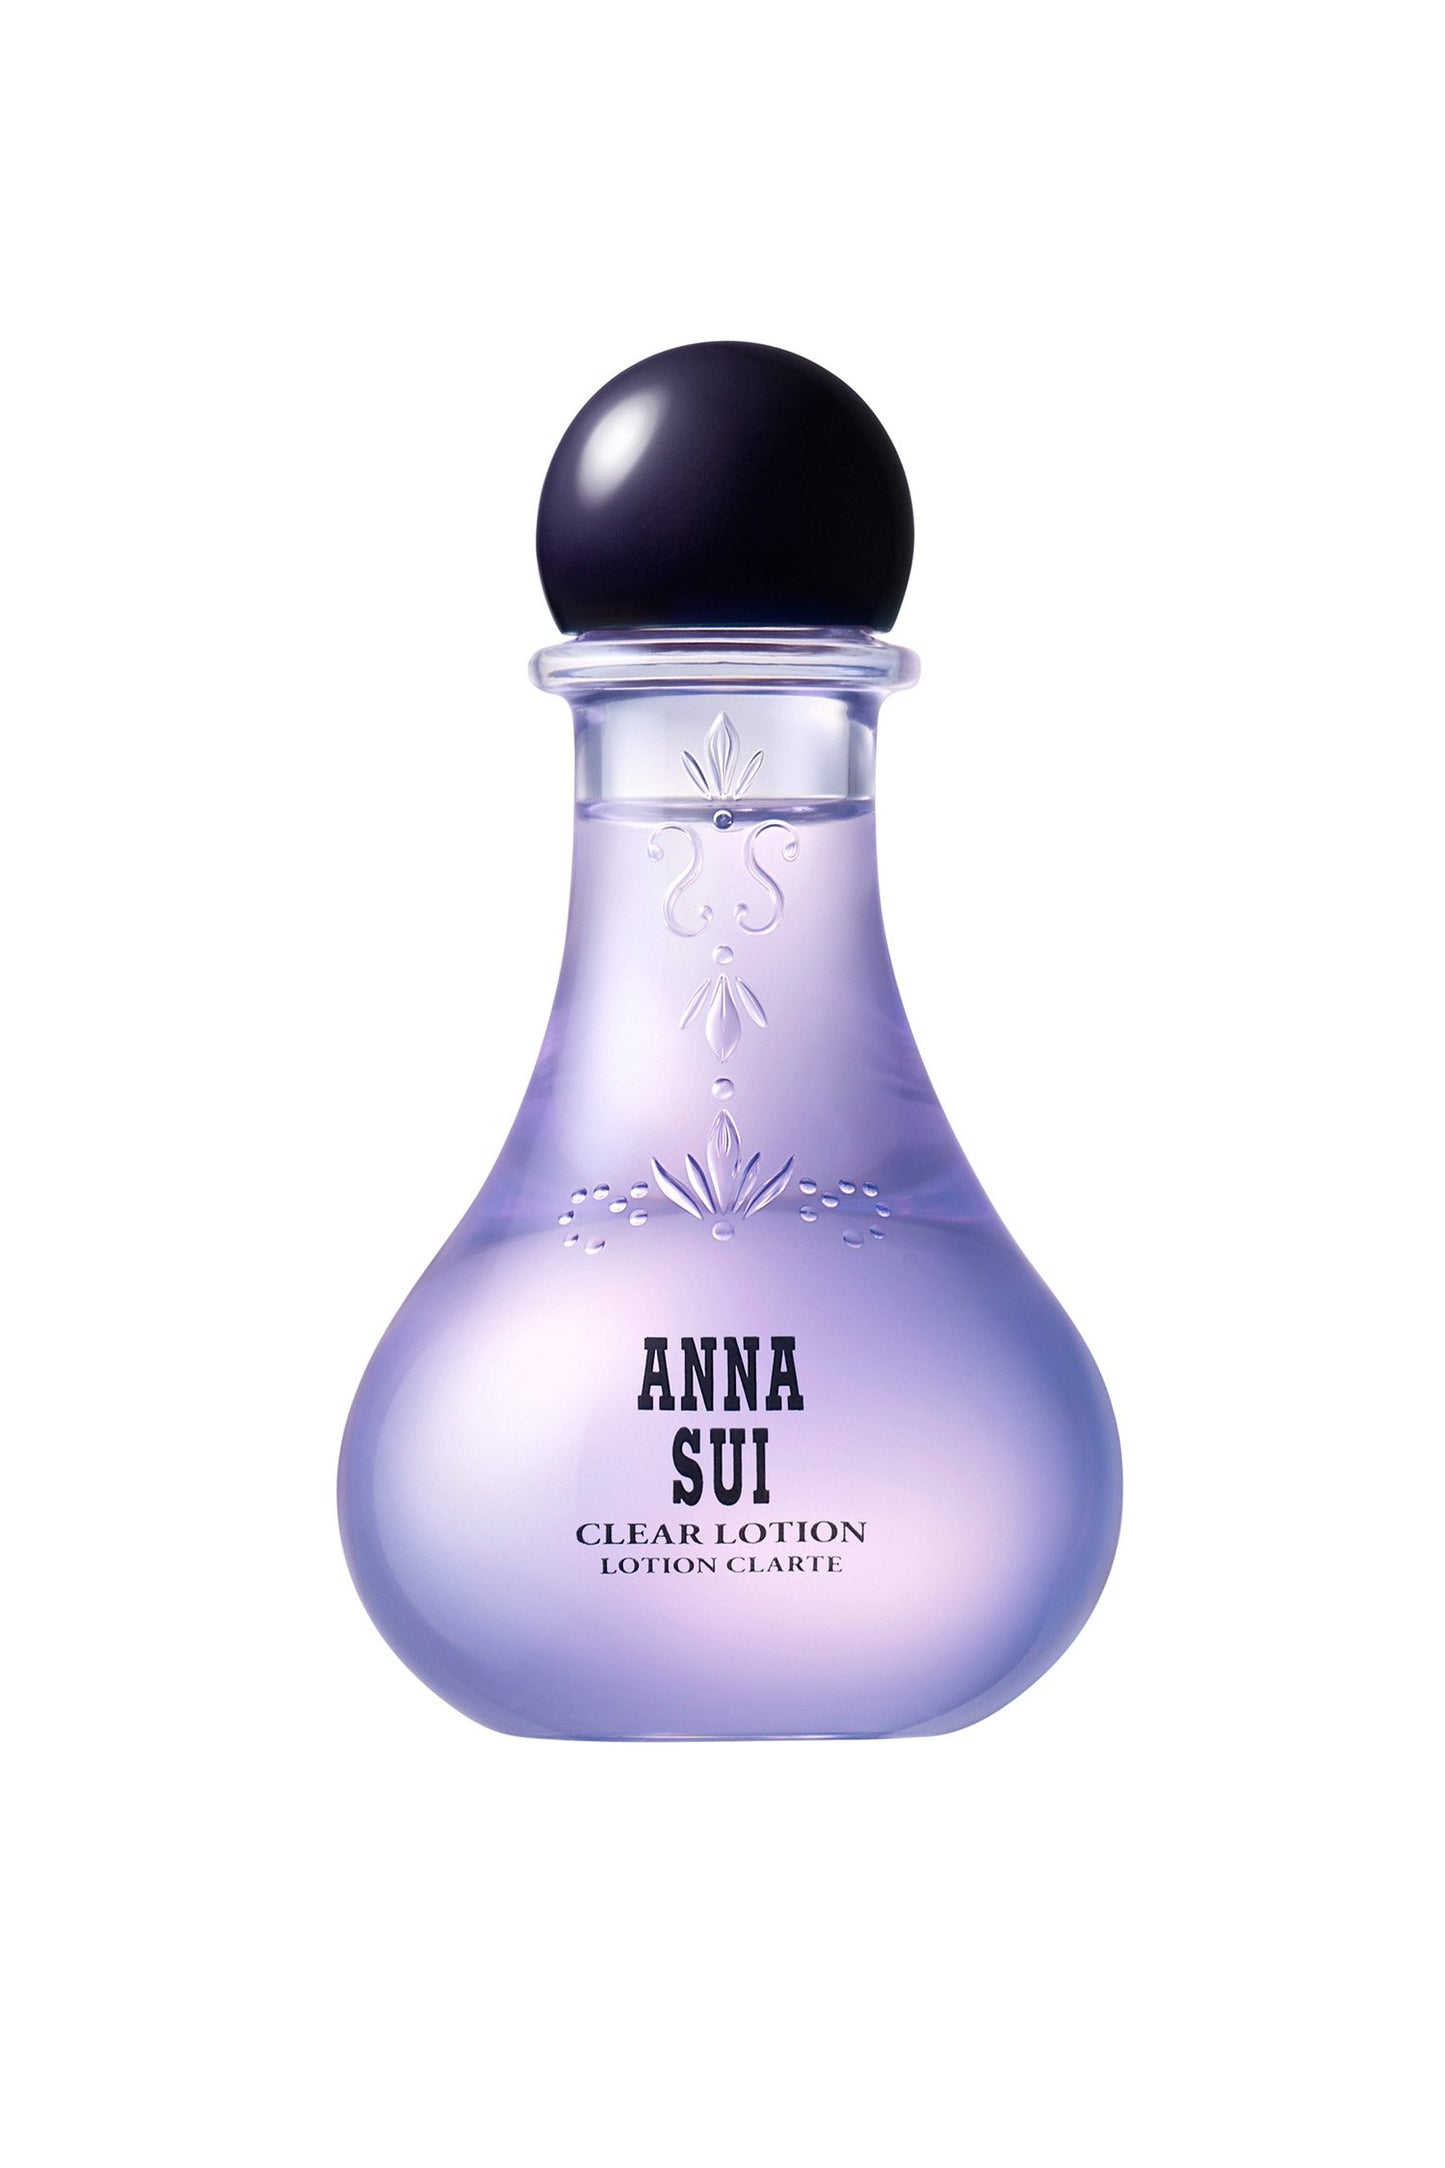 In a transparent violet, bulb-shaped container, floral design and Anna branding, a round cap on top